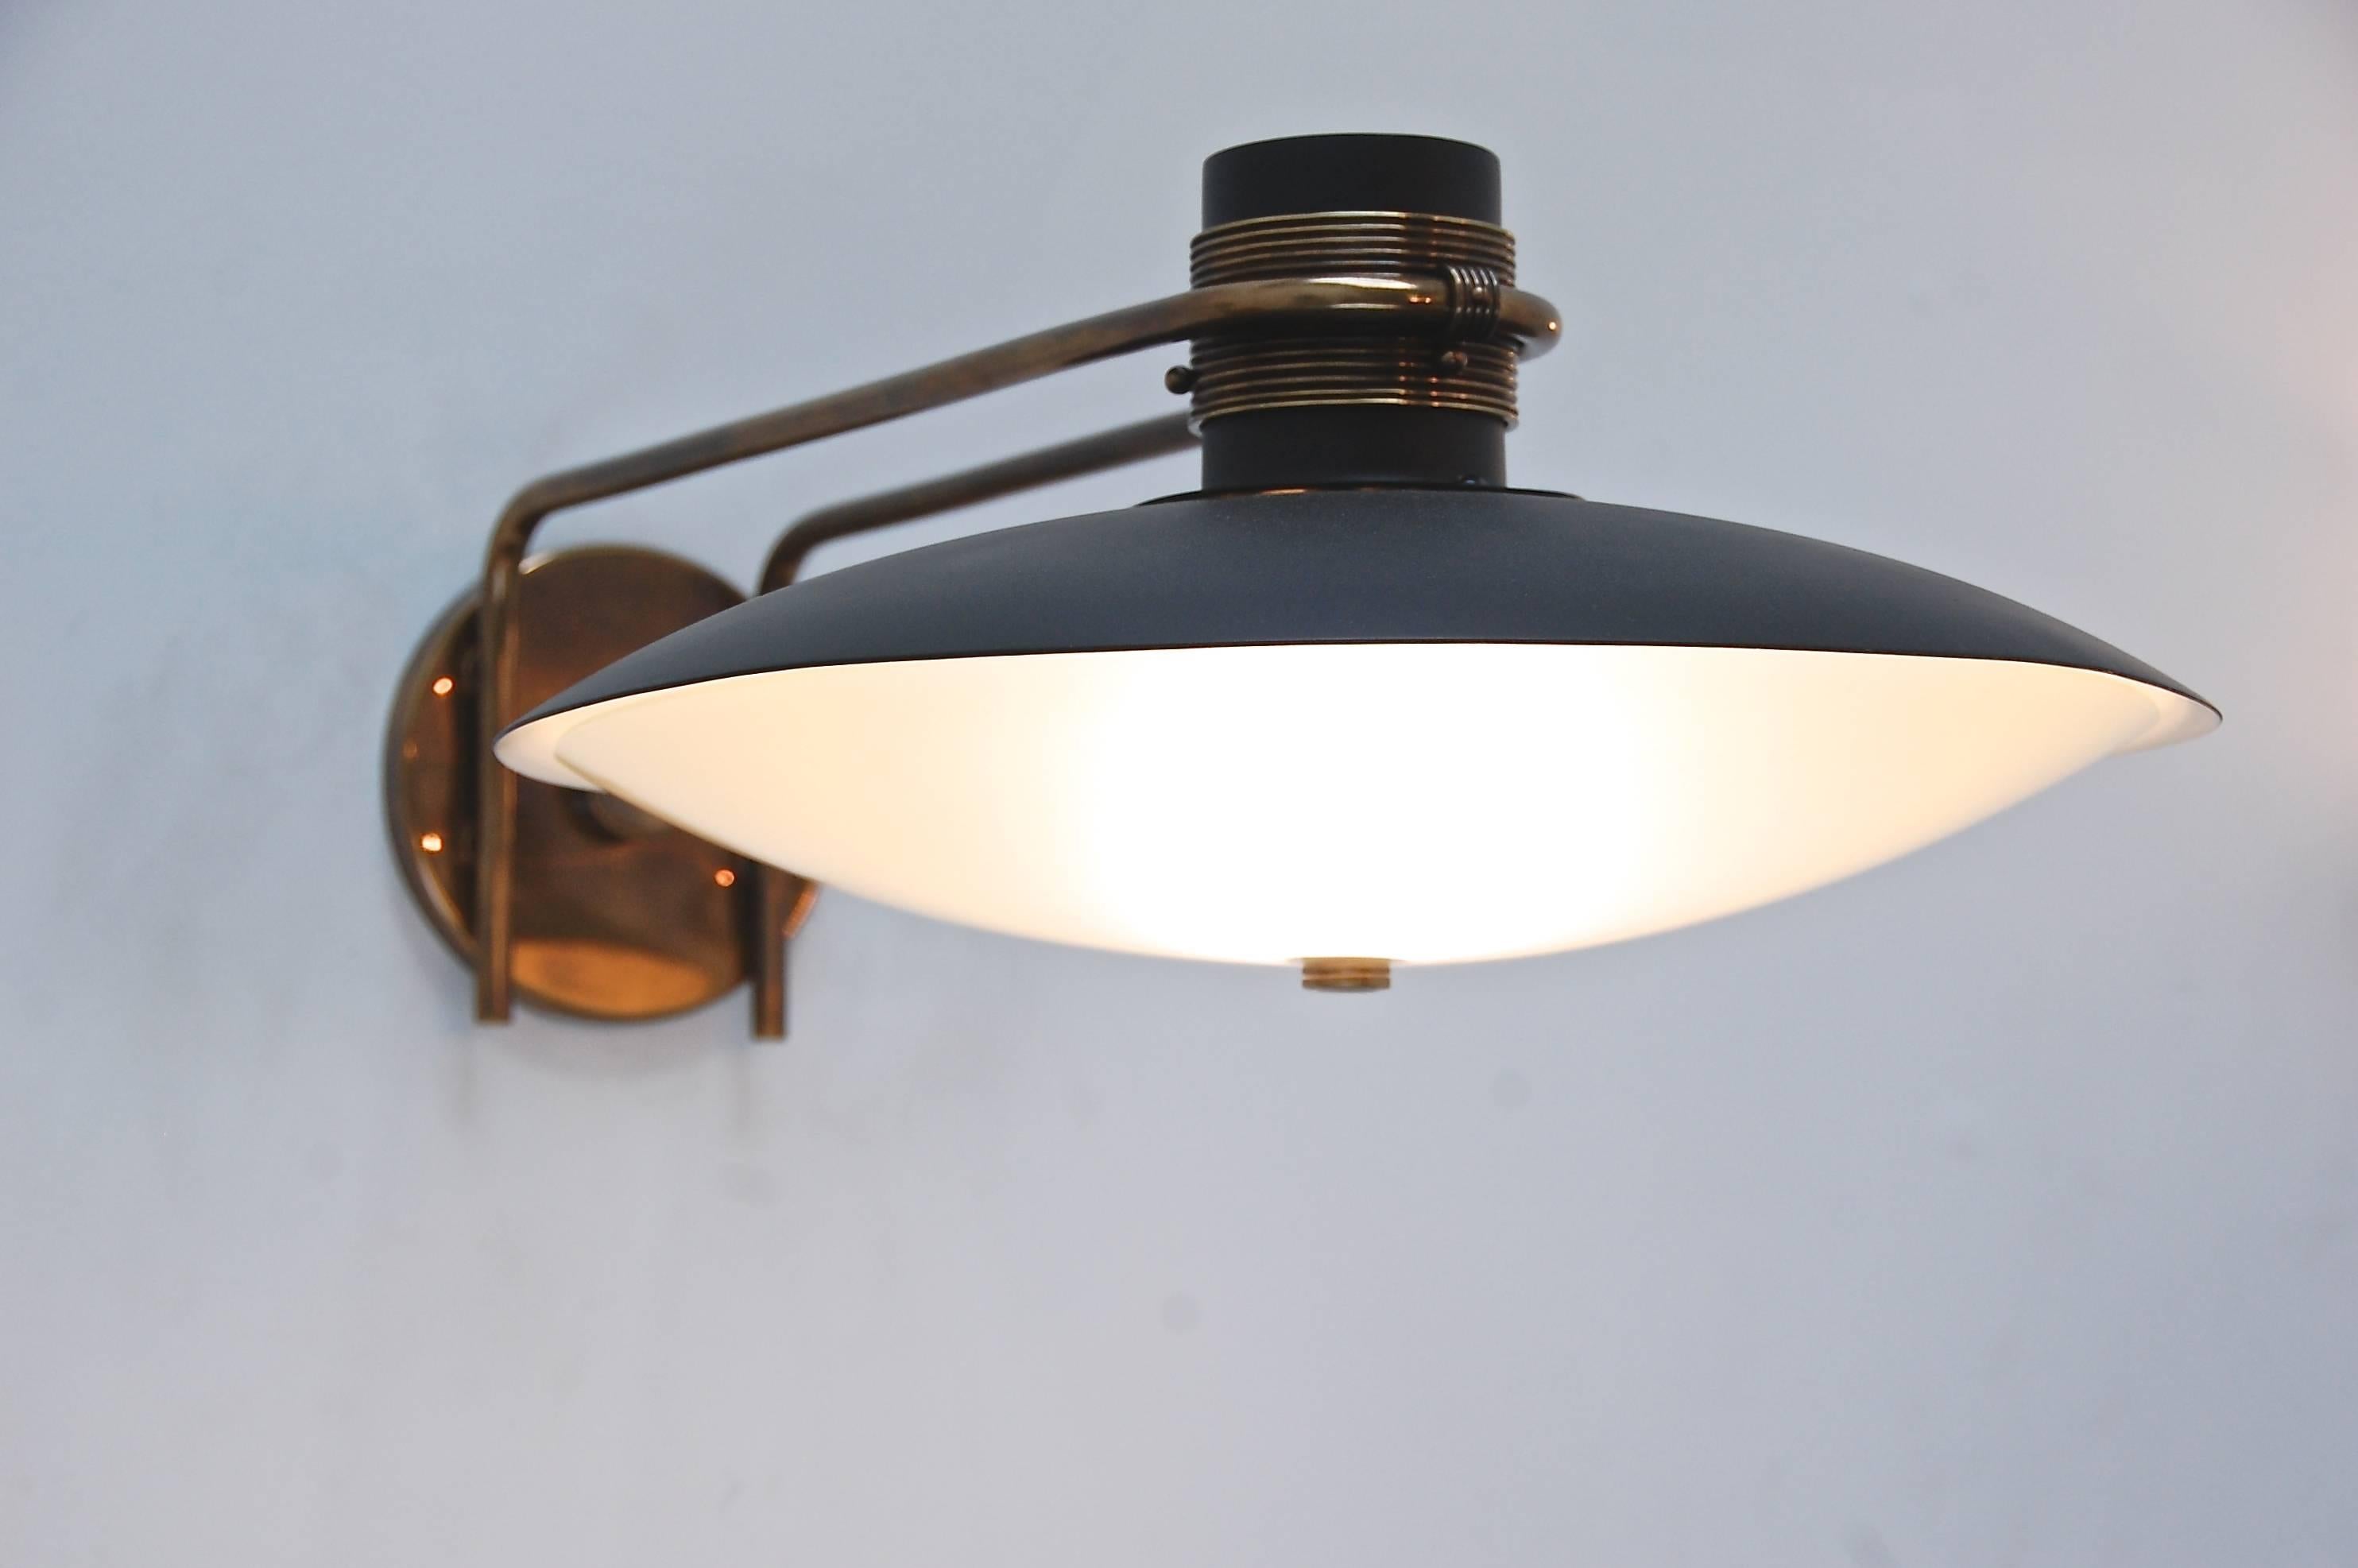 Unique Italian studio wall lamp made from brass, painted aluminum and blown glass. Beautiful hardware frames the dome shaped fixture. Two-light sockets, one medium based and one candelabra based to allow light to exit from the top and bottom of the